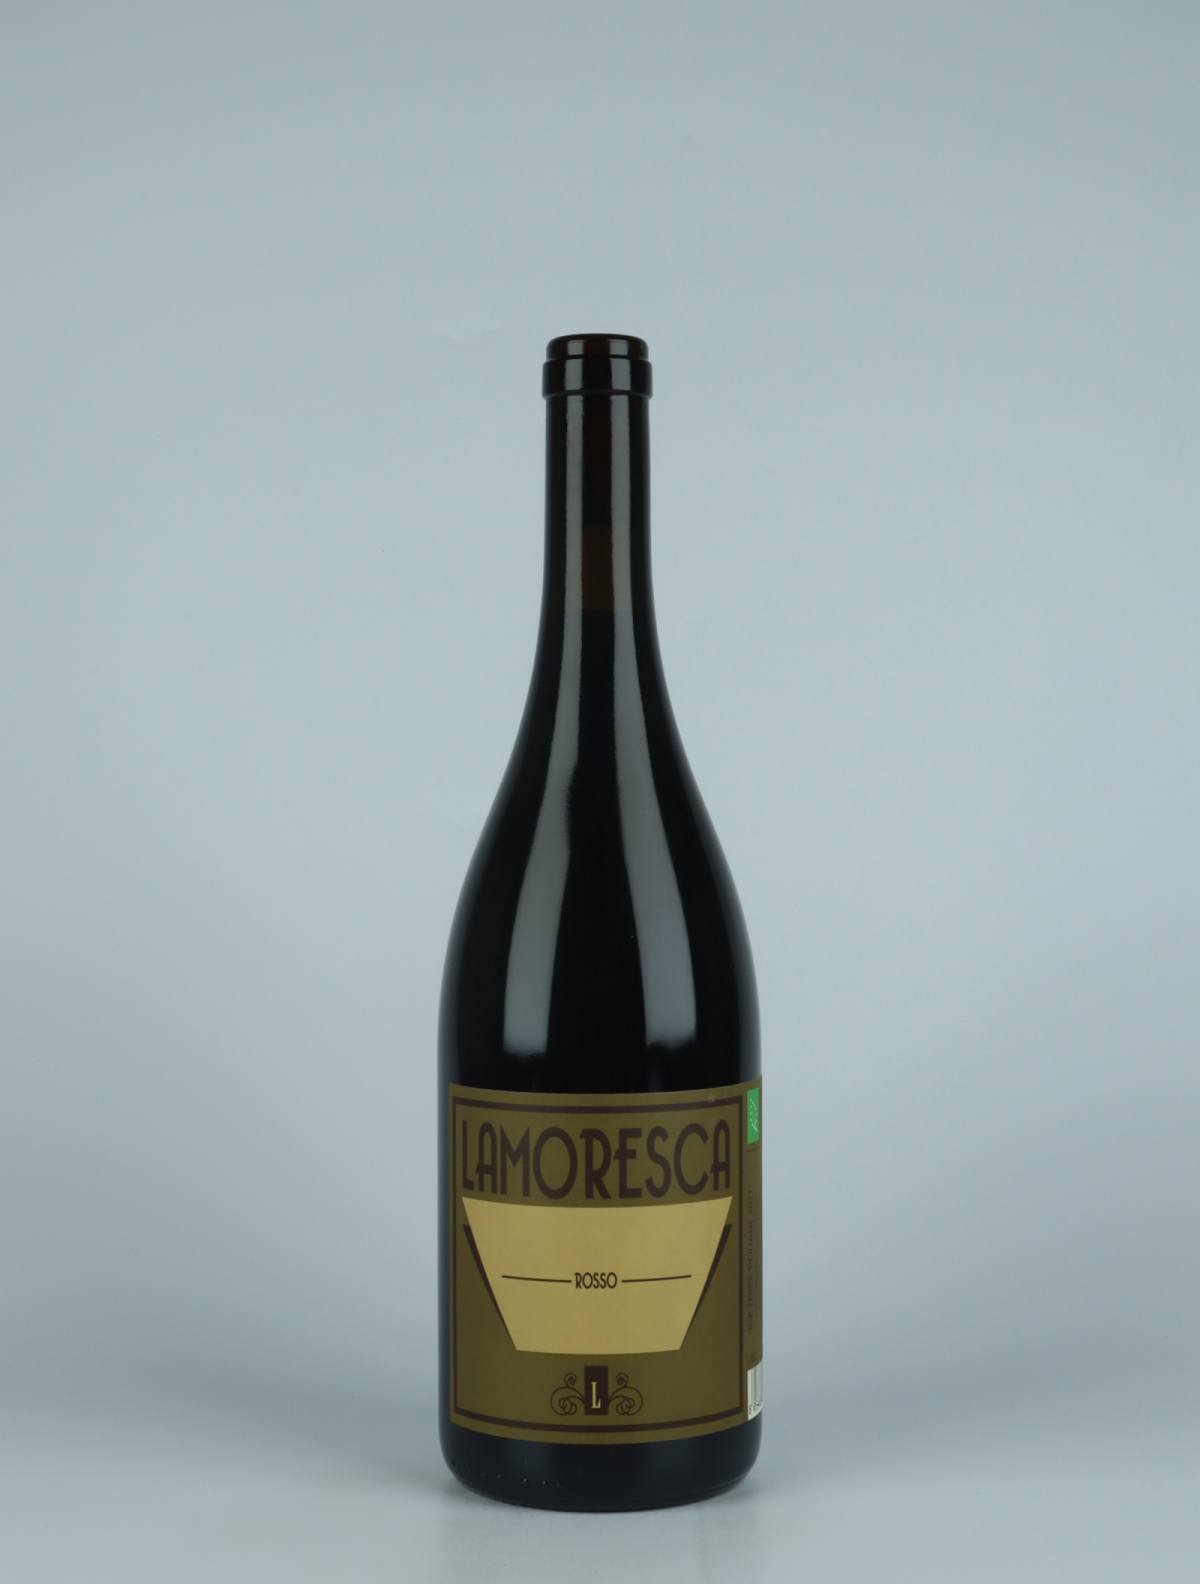 A bottle 2021 Rosso Red wine from Lamoresca, Sicily in Italy